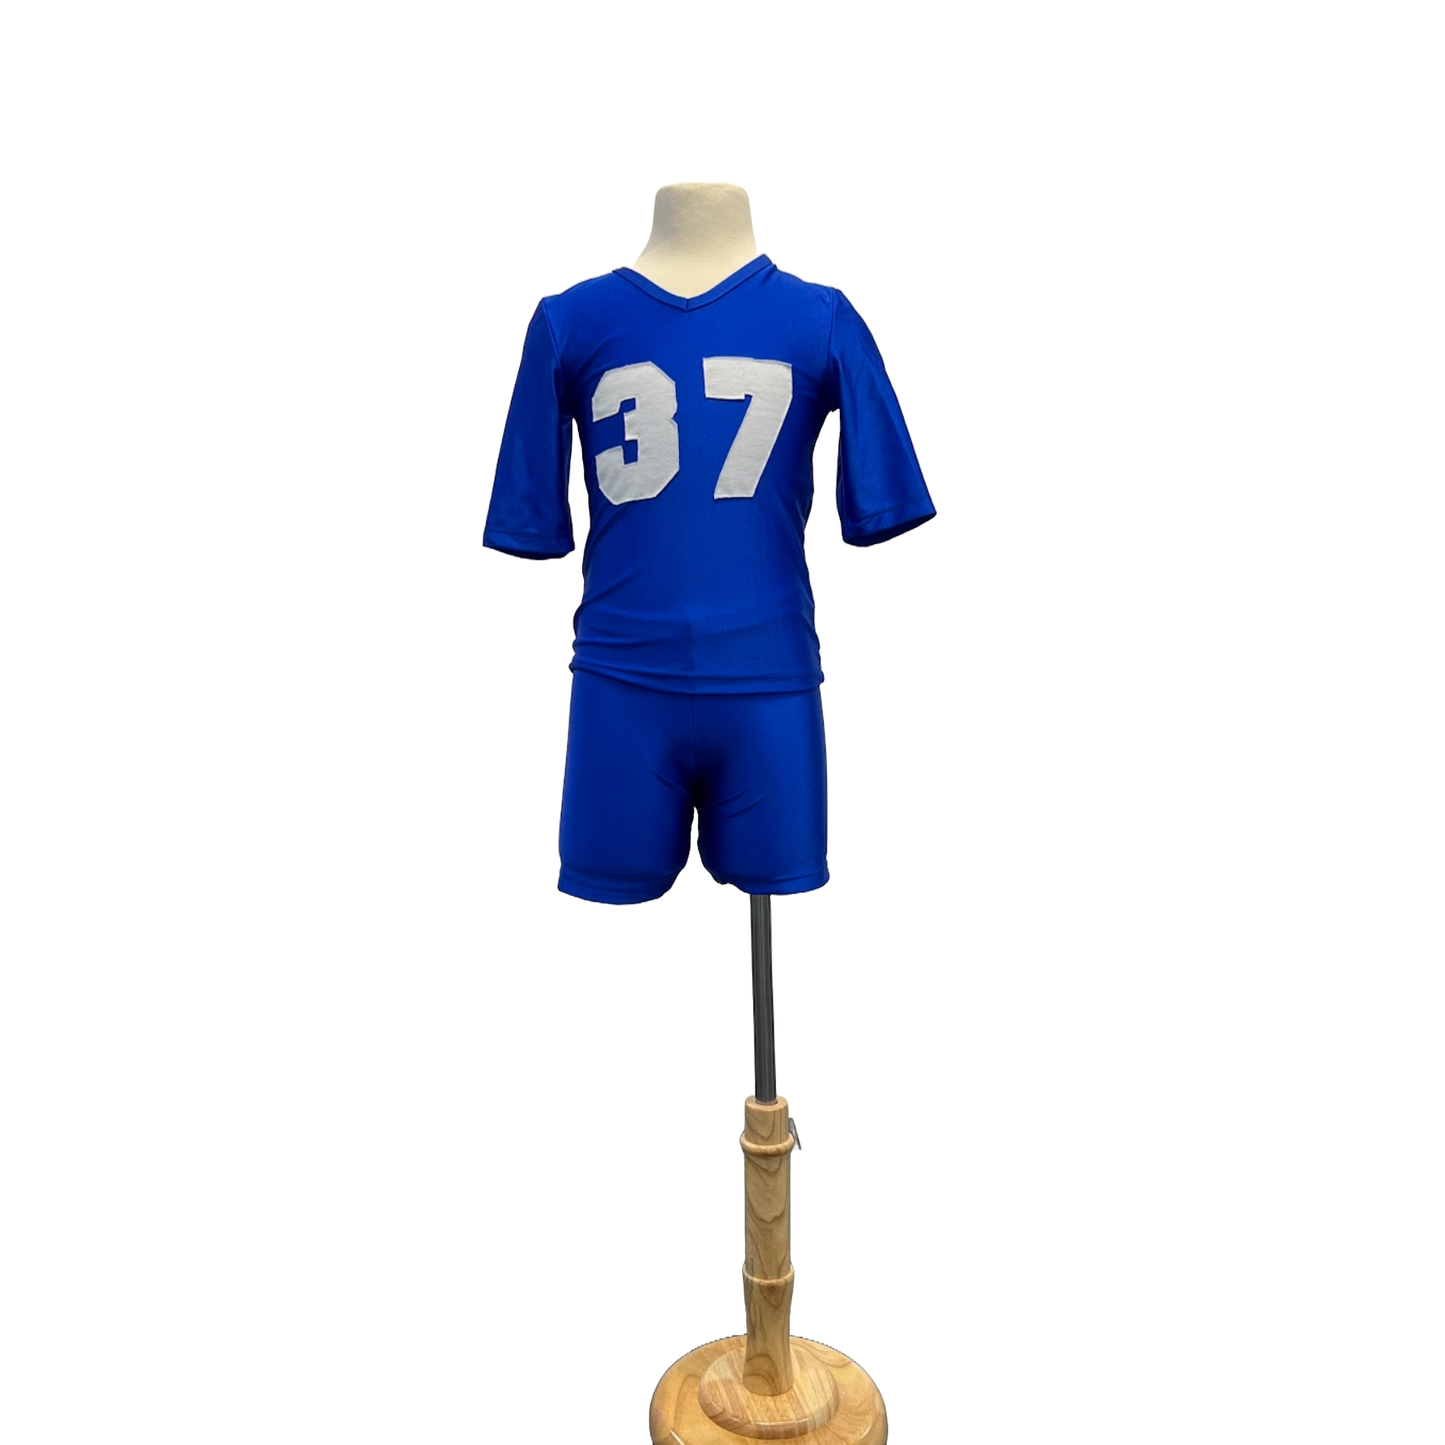 Royal blue football outfit